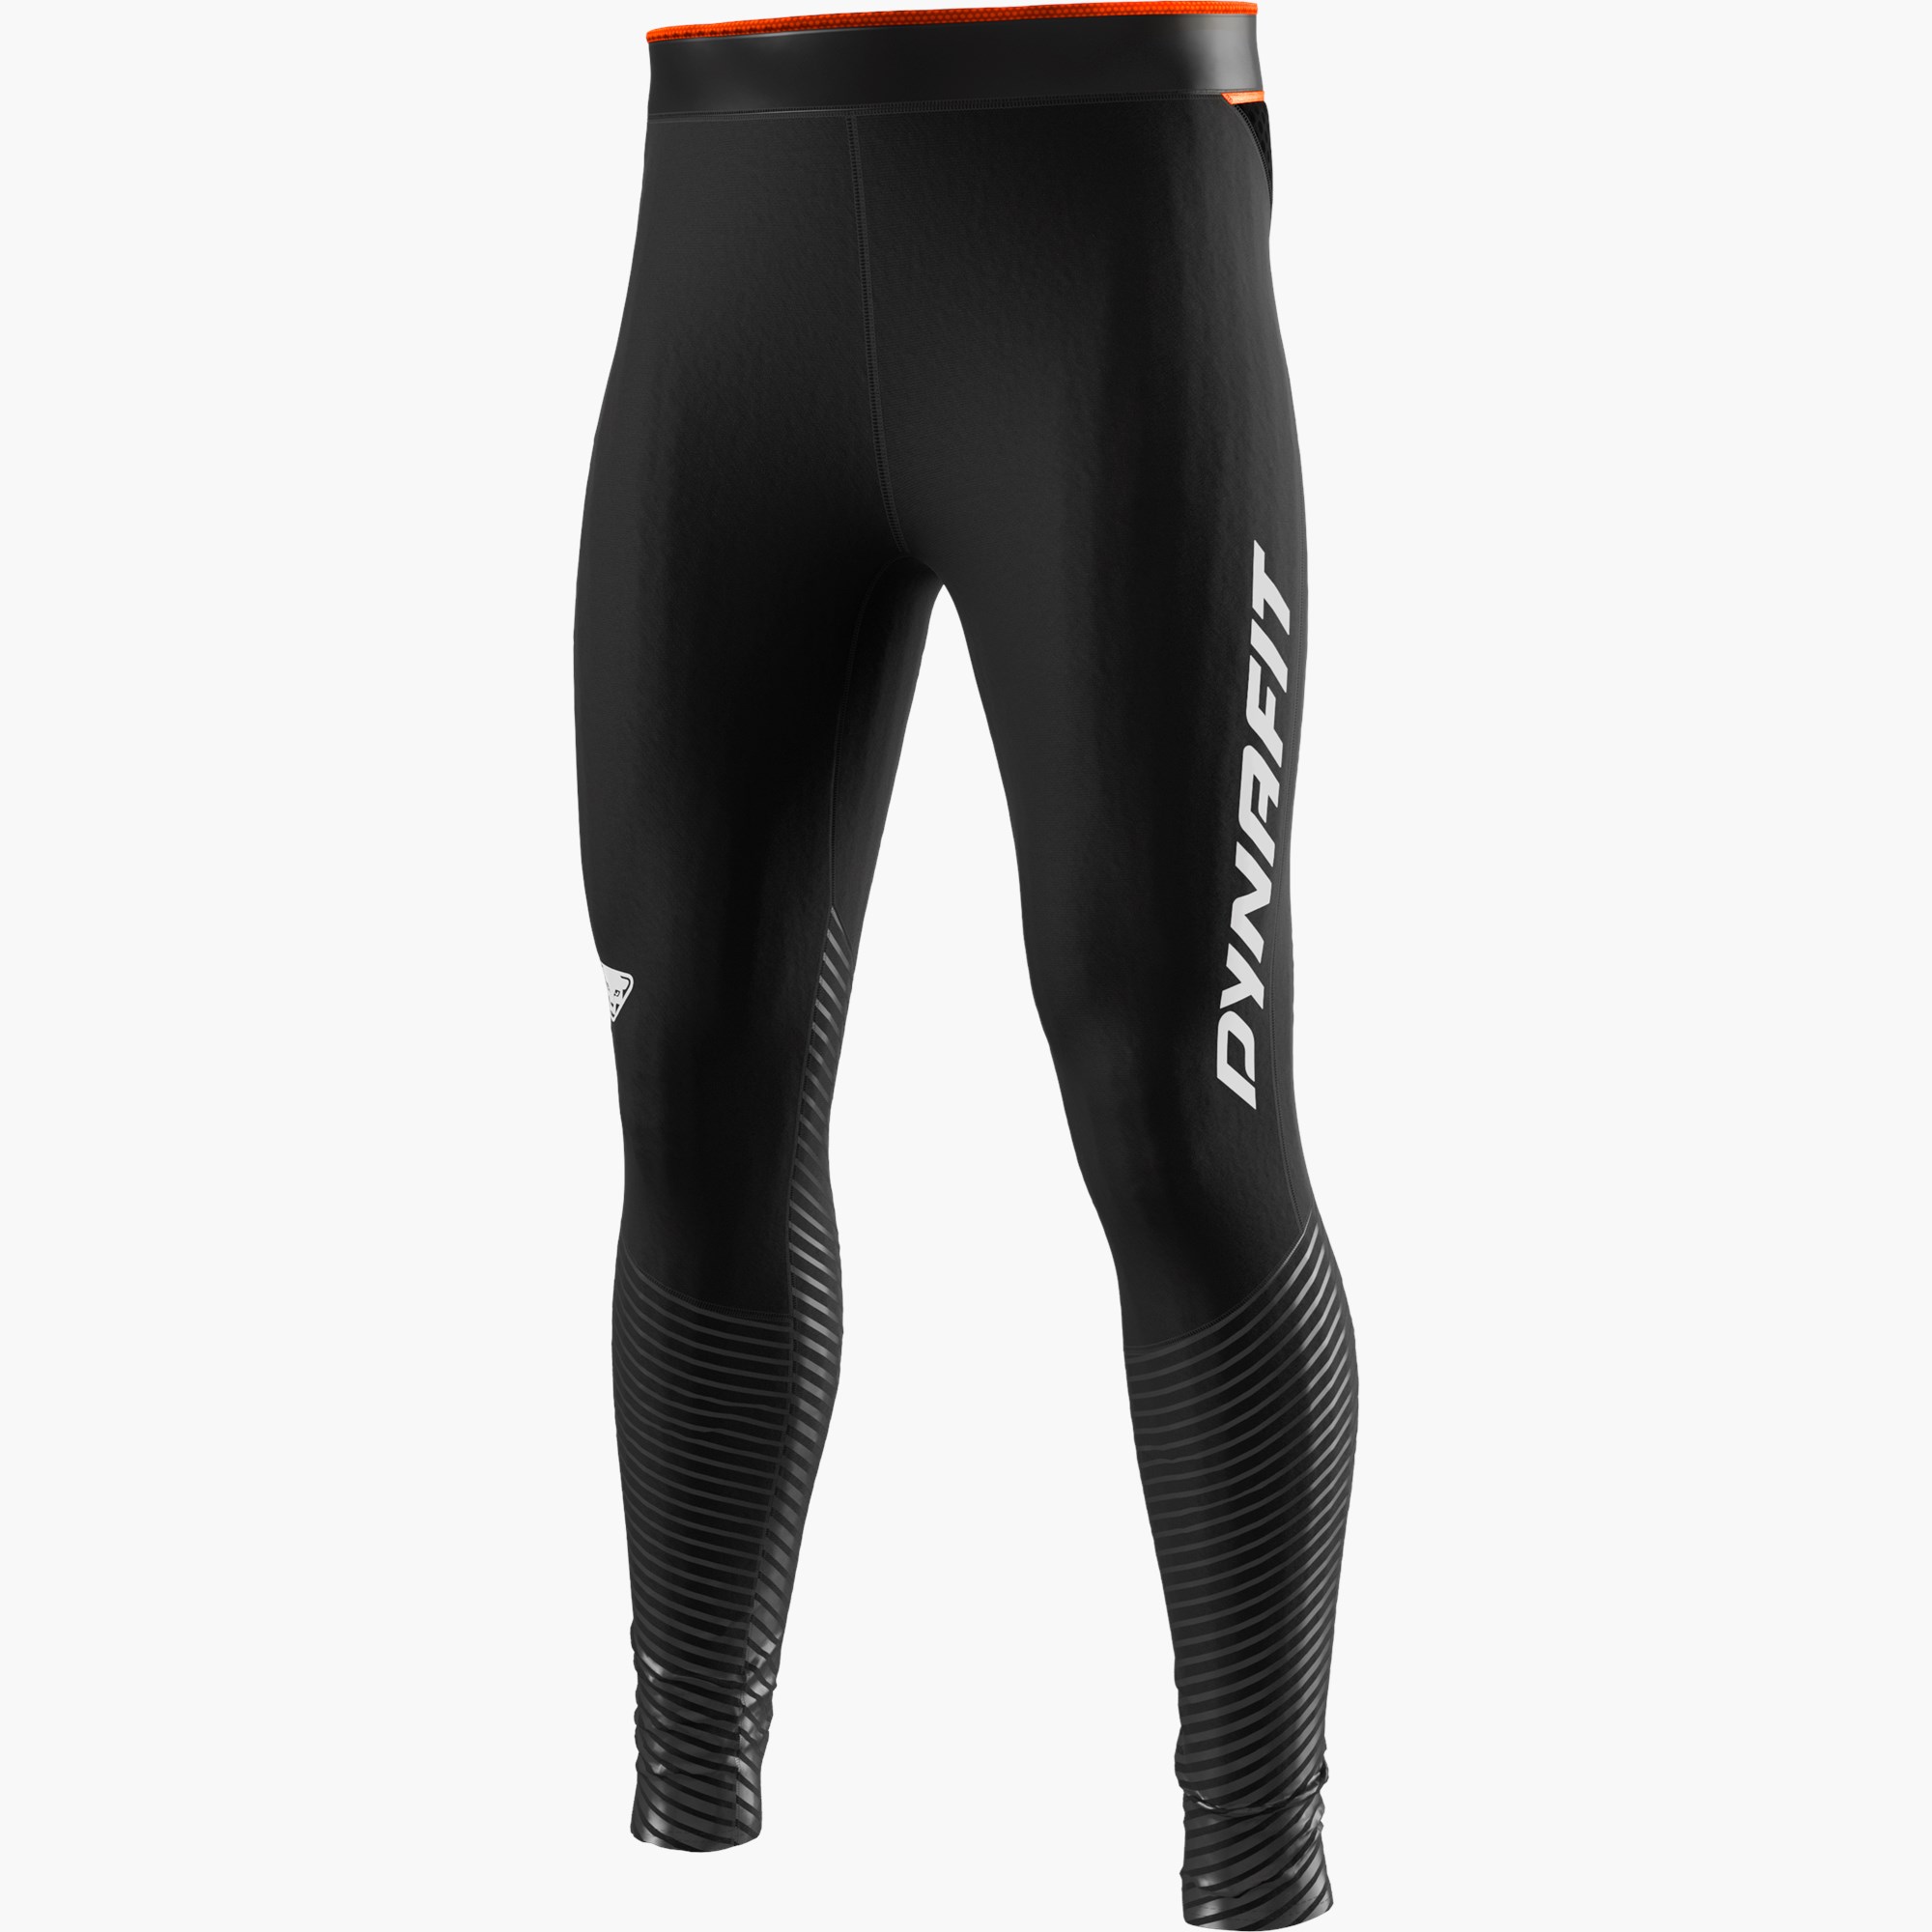 Time To Run Men's Pro Reflective Running Training Tight/Pant